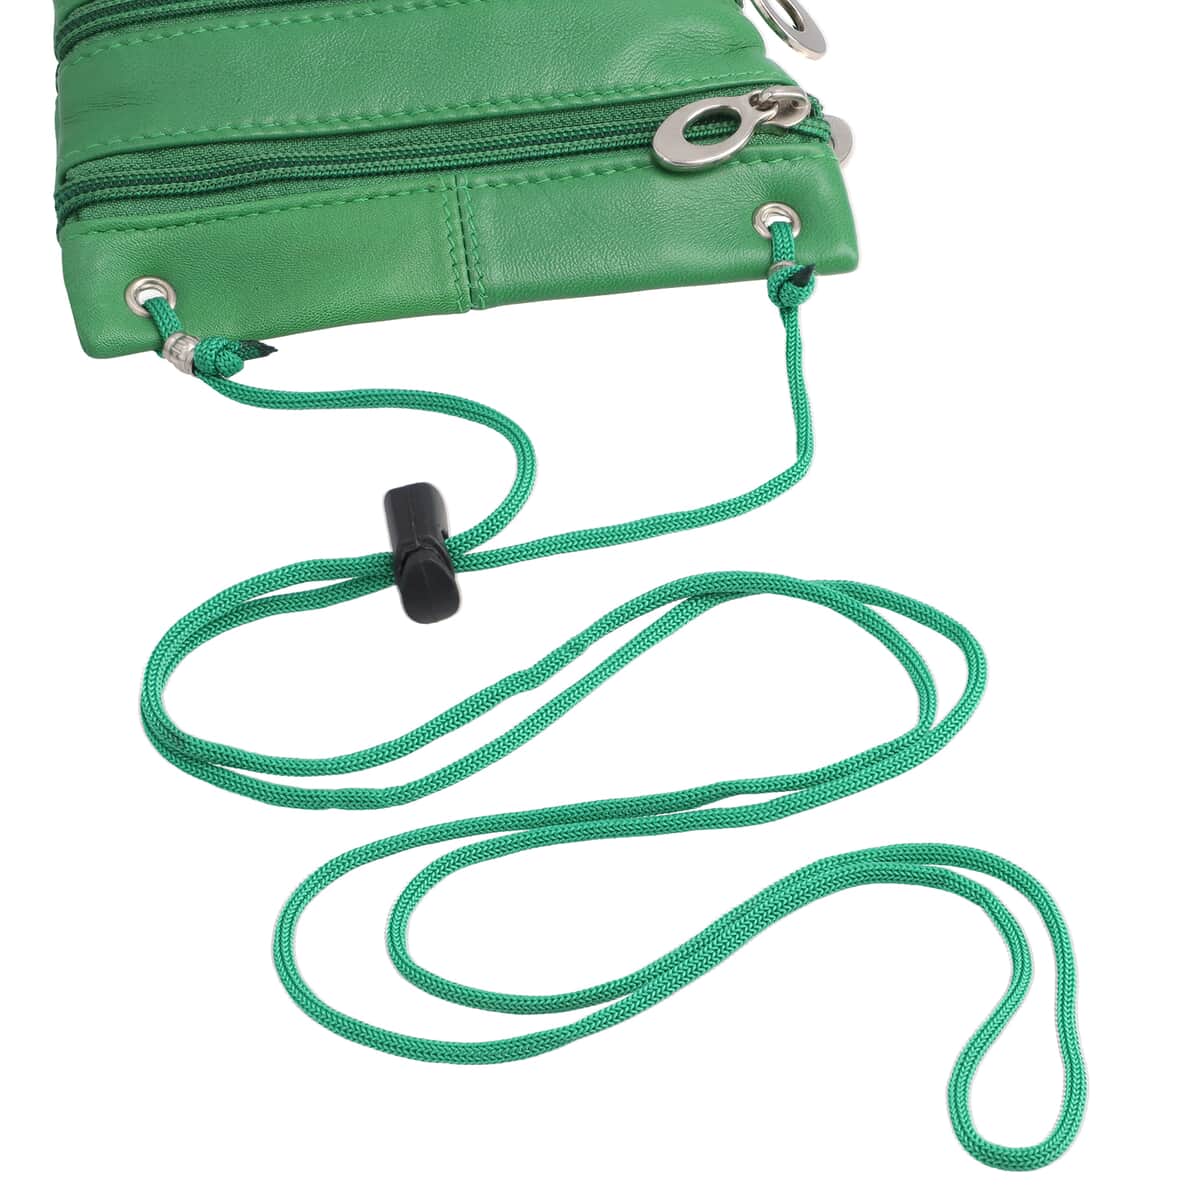 NEWAGE Green 100% Genuine Leather Crossbody Bag with Man-made Strap image number 4